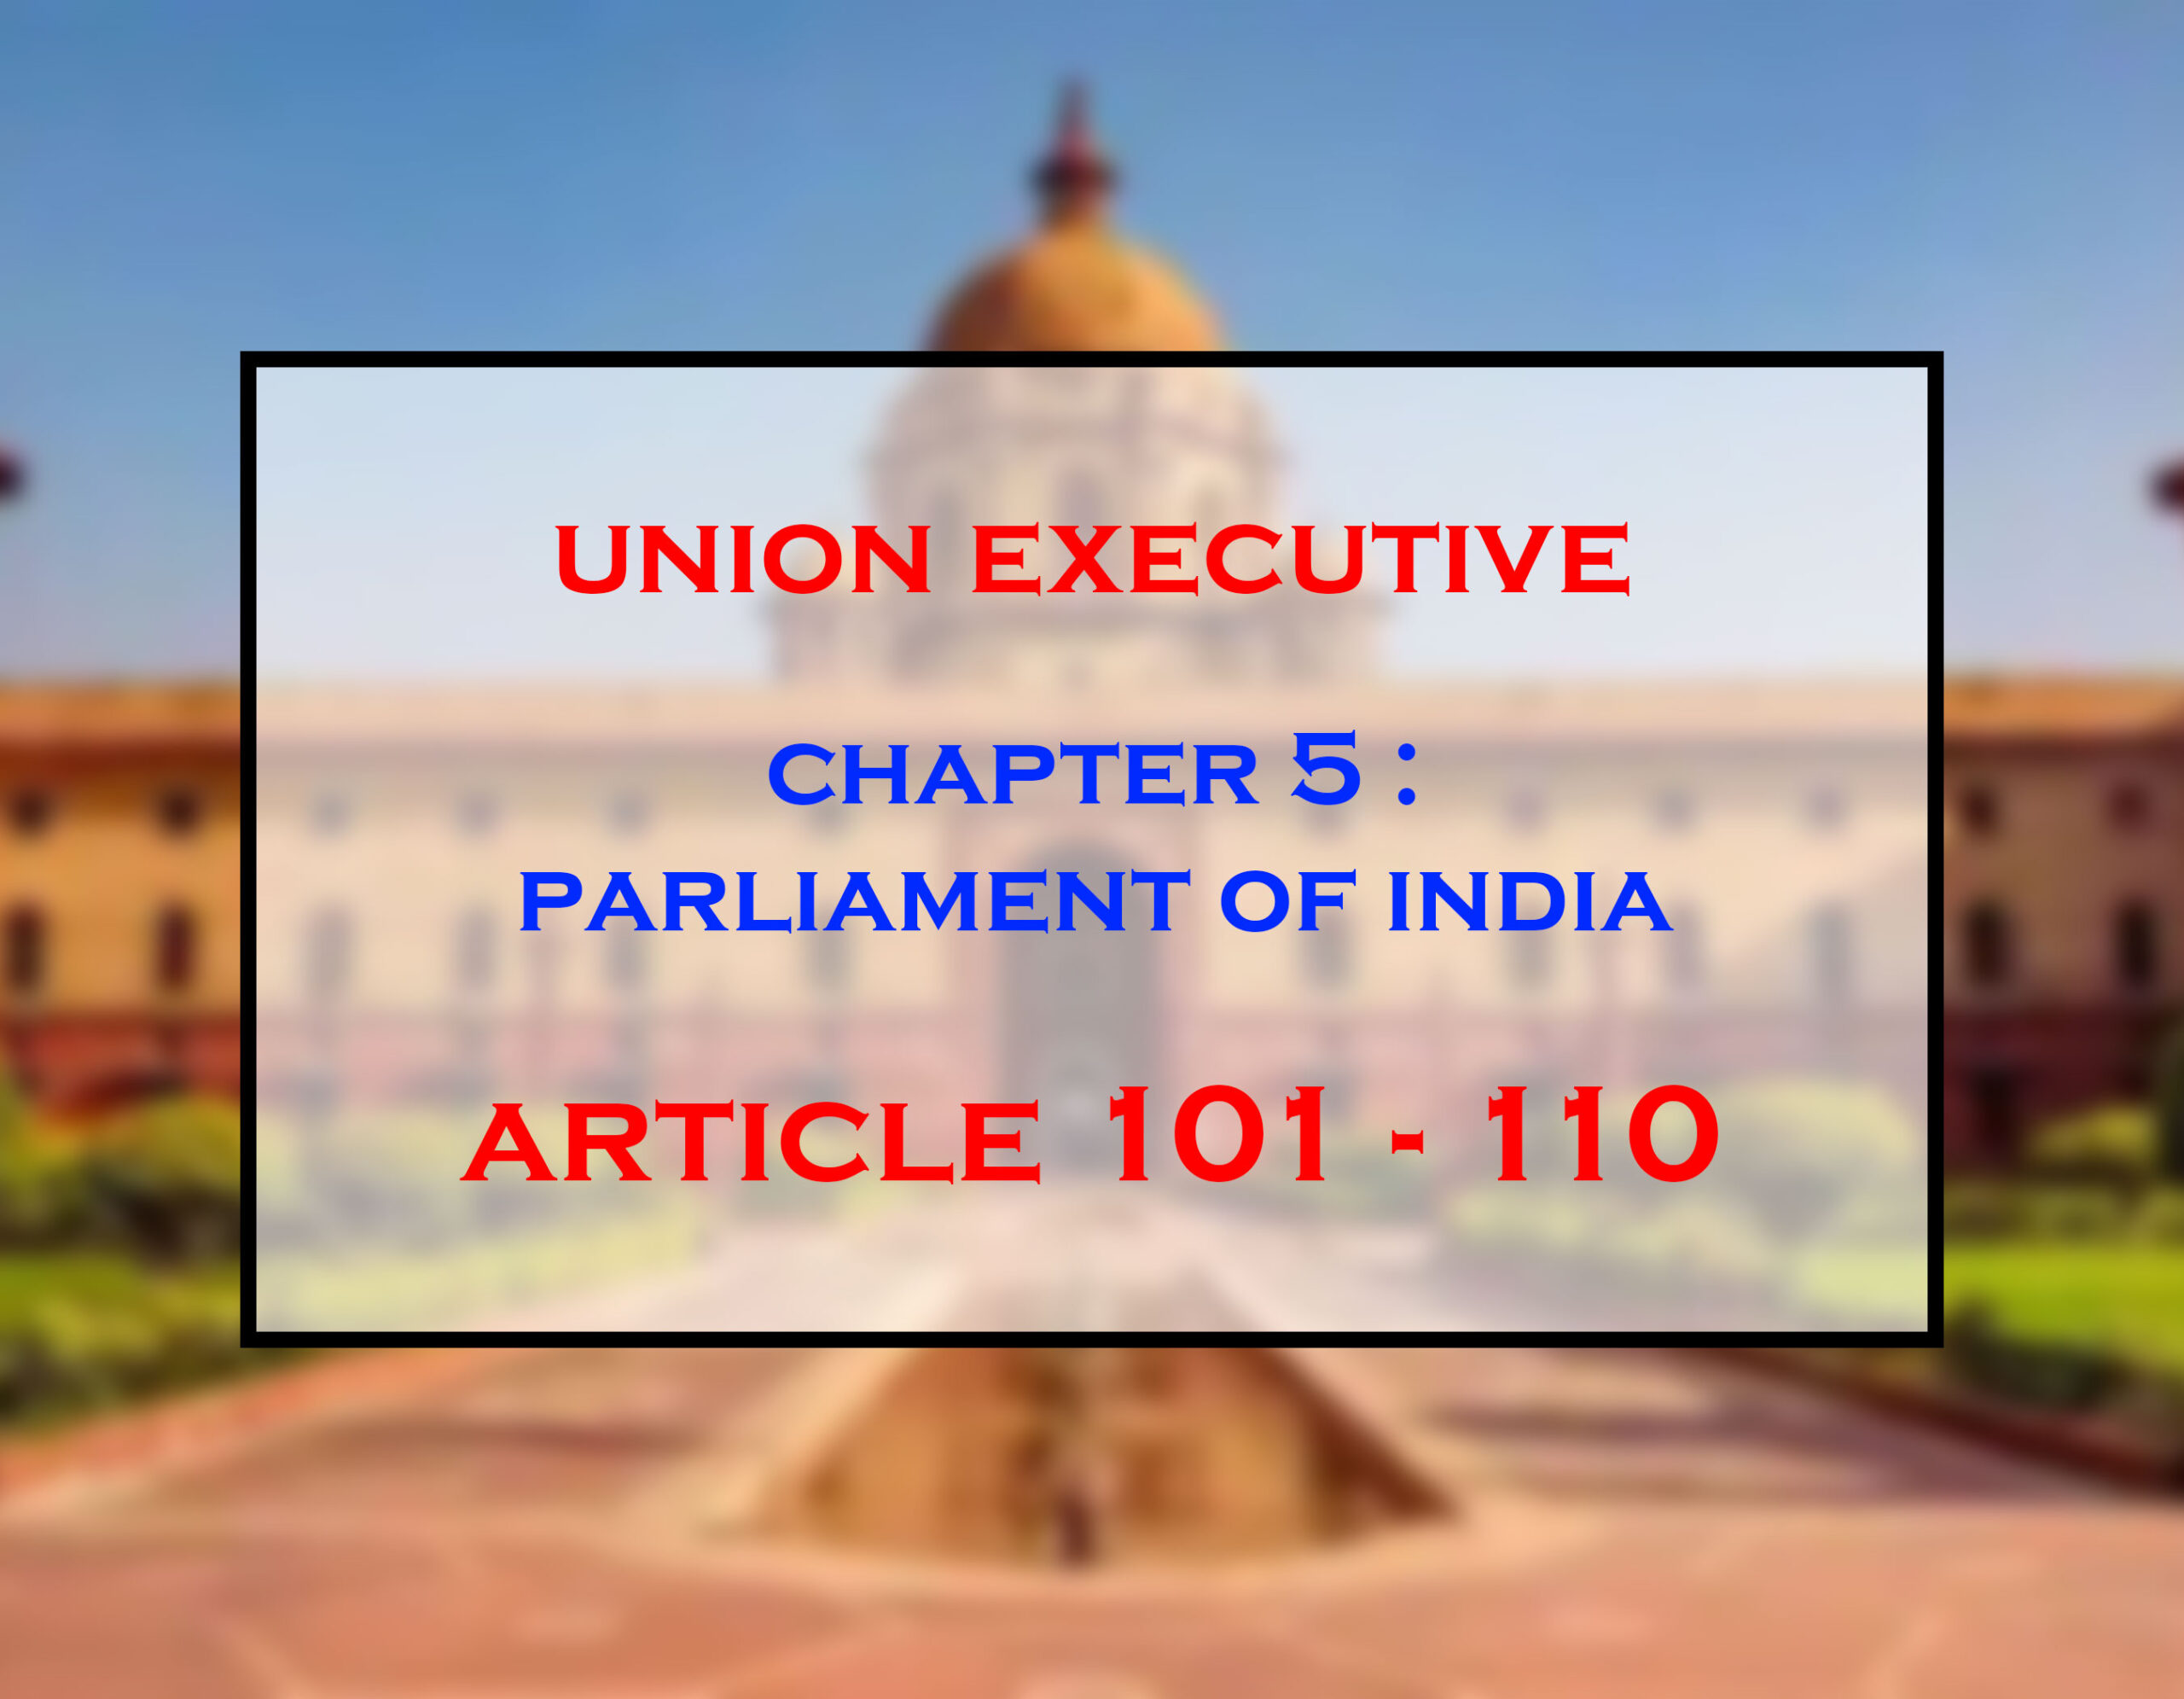 Parliament of India (Article 101-110)